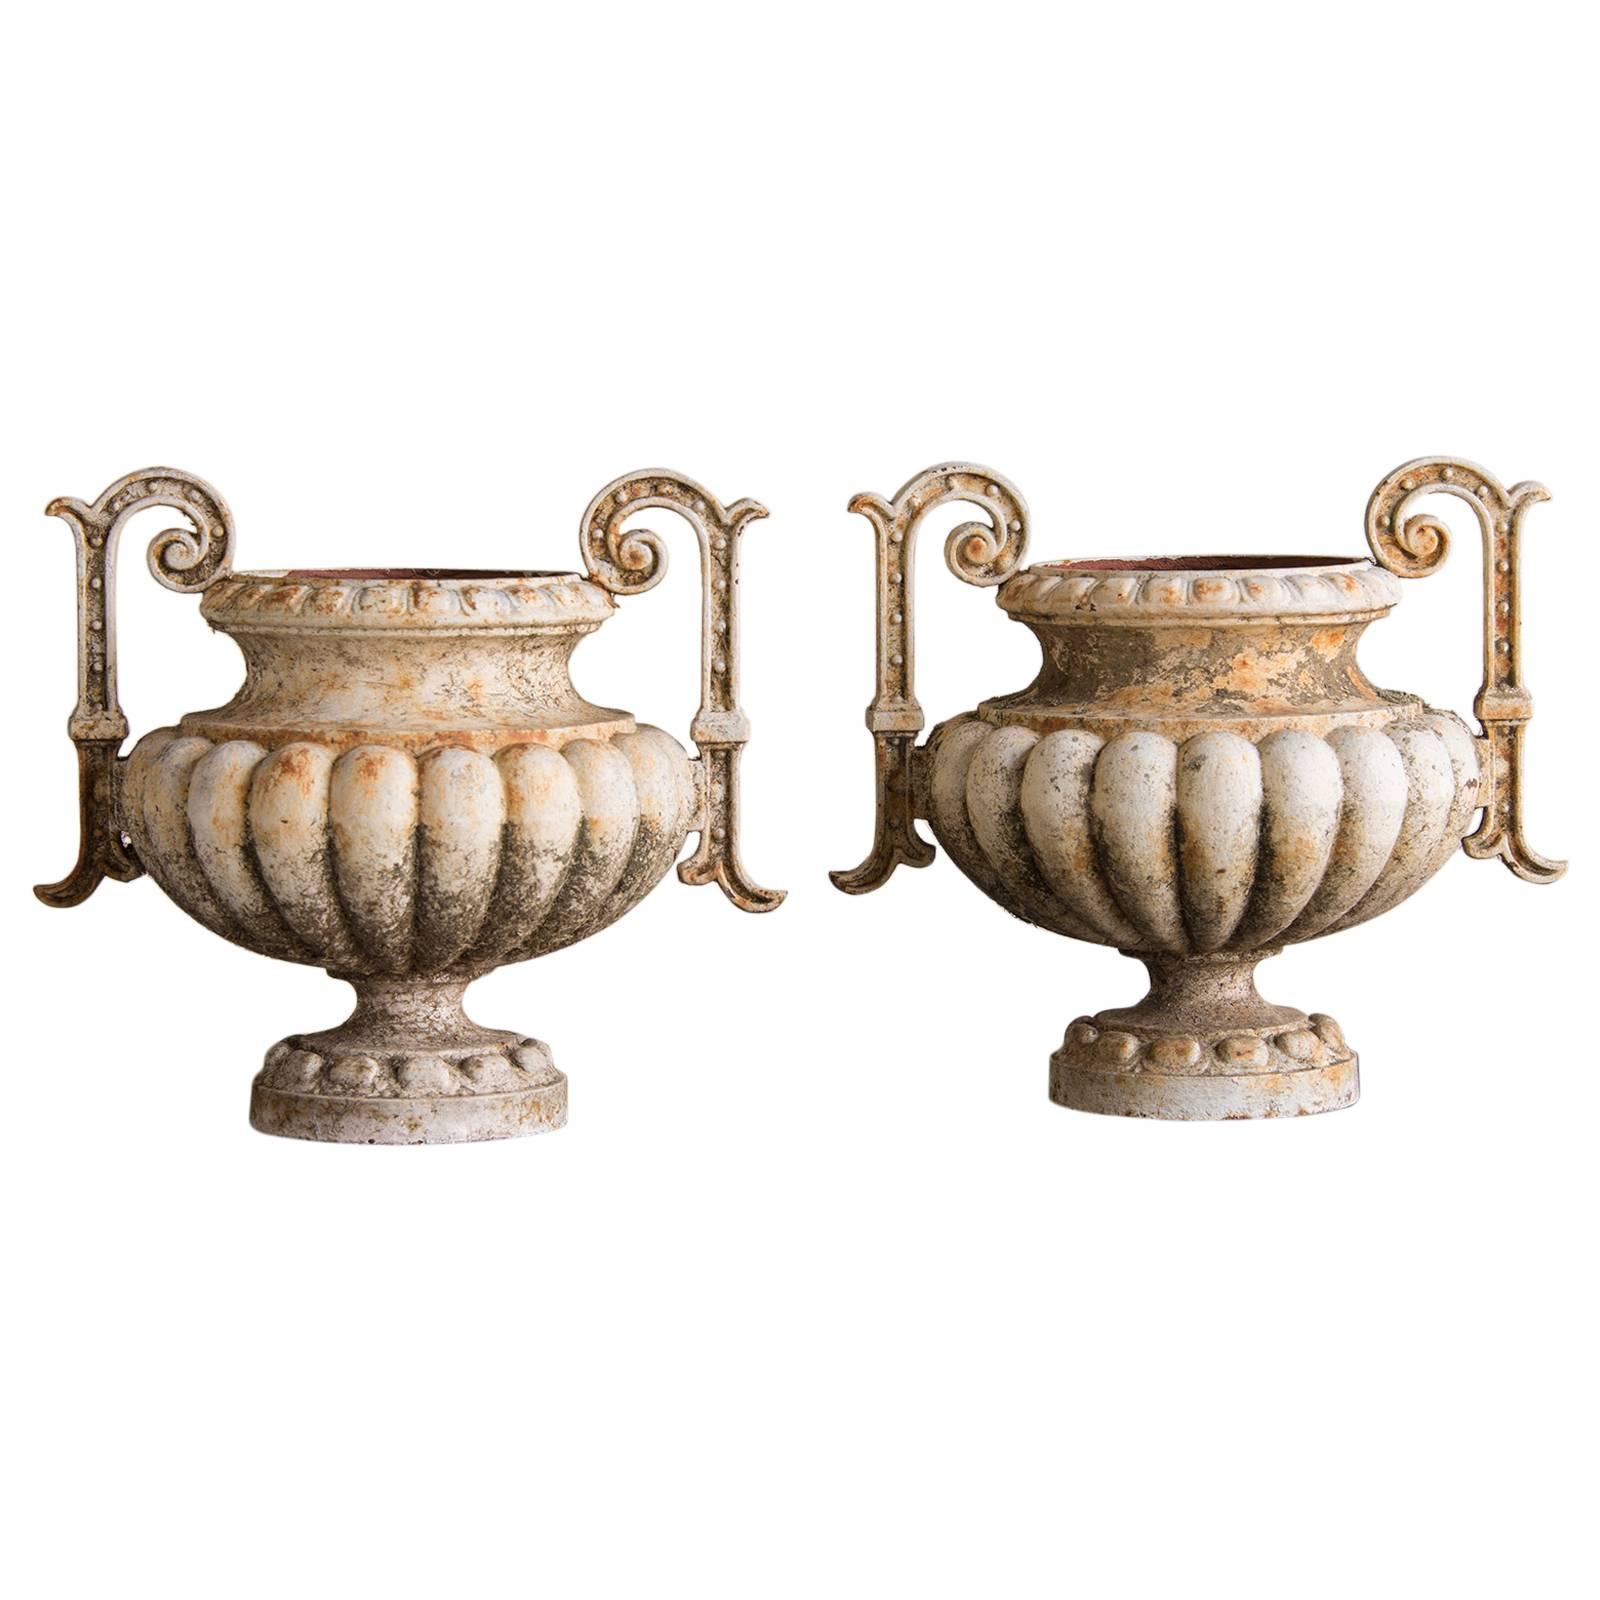 Pair of Antique French Painted Iron Garden Urns, circa 1880